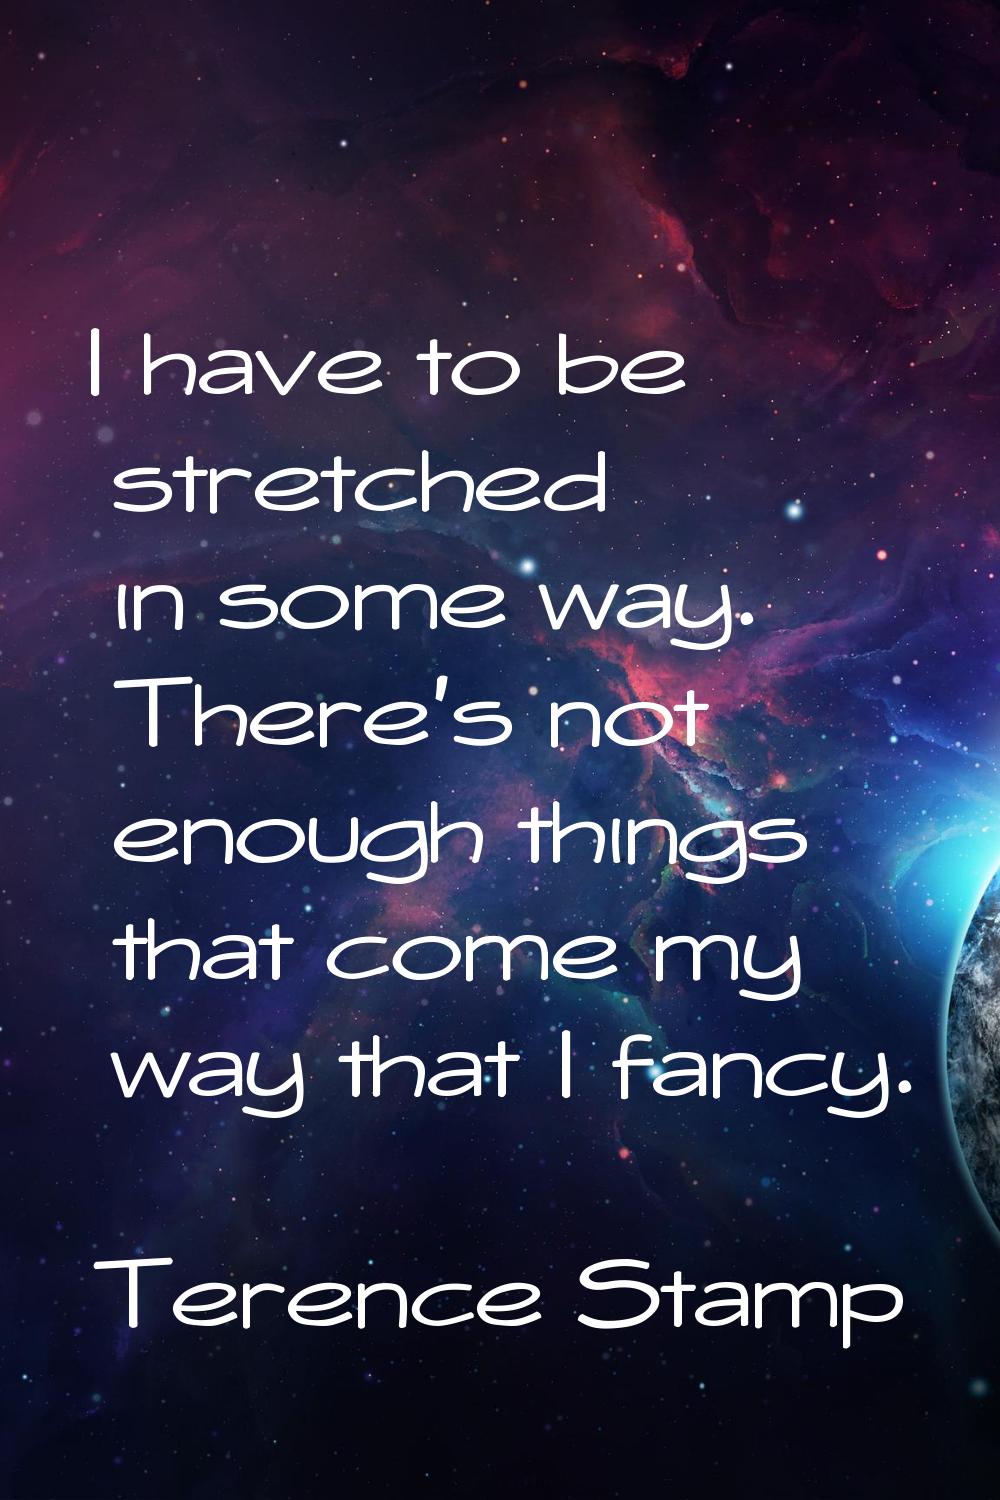 I have to be stretched in some way. There's not enough things that come my way that I fancy.